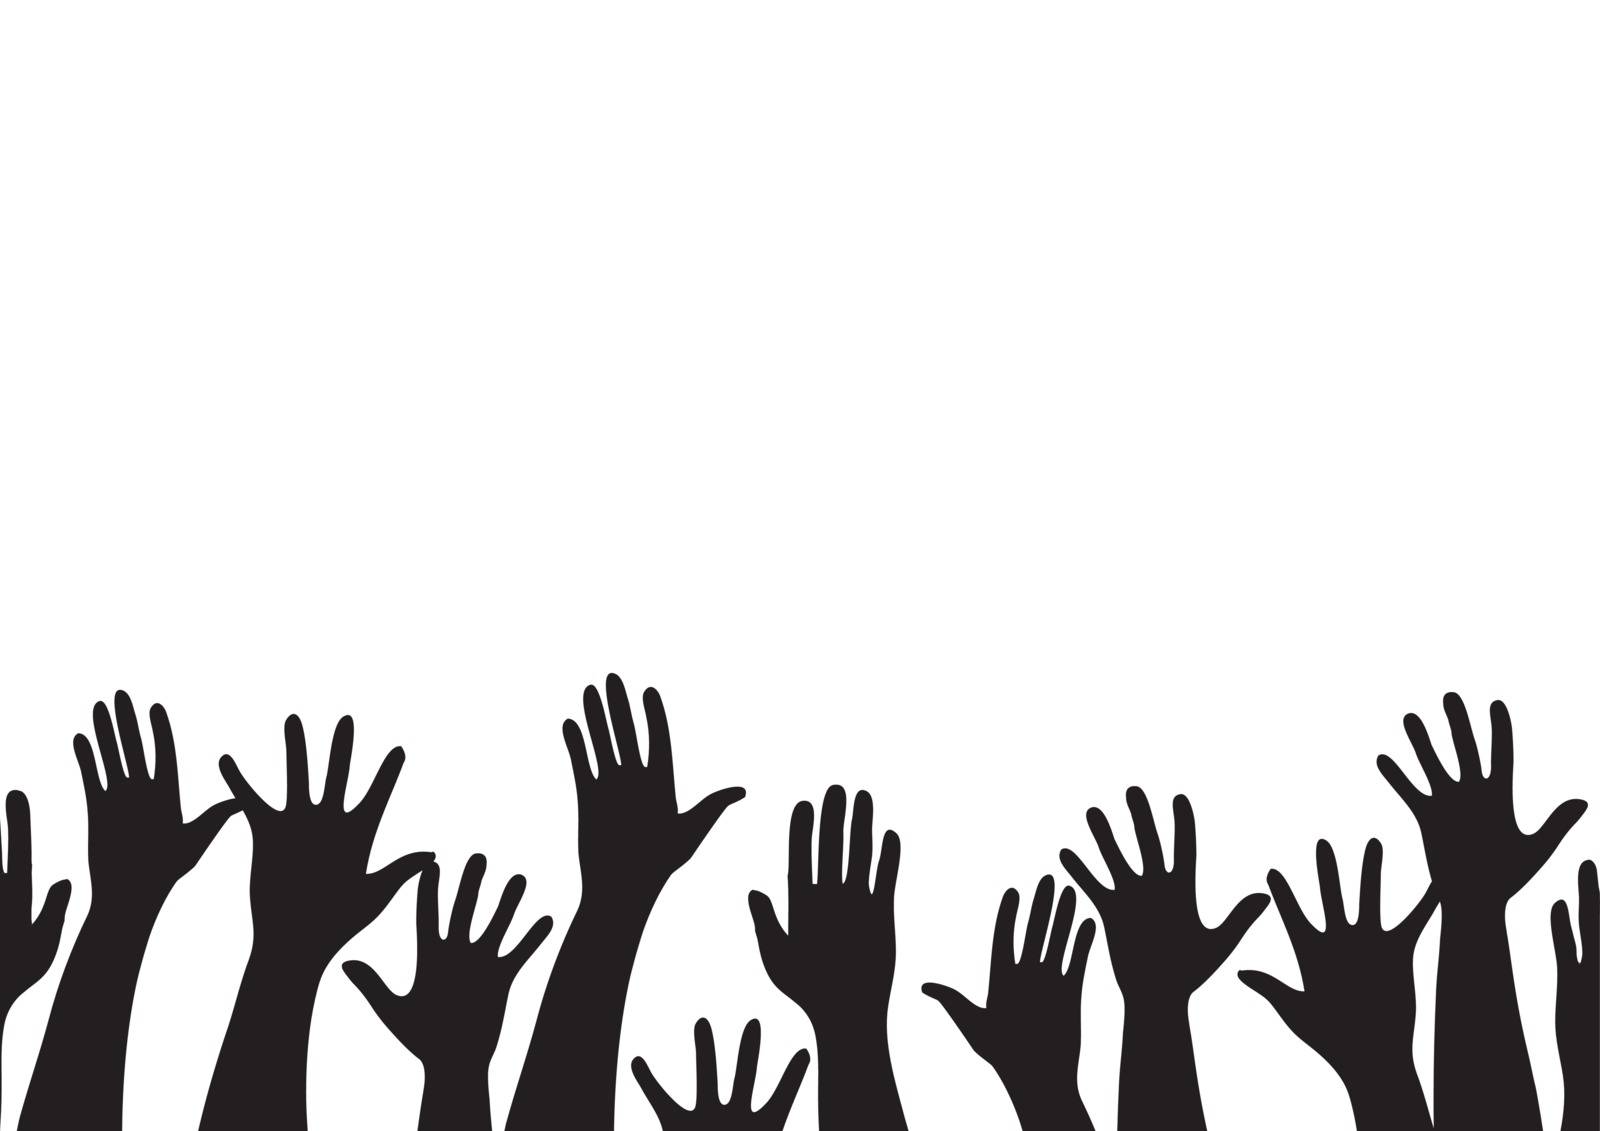 all hands up and background art vector by h-santima